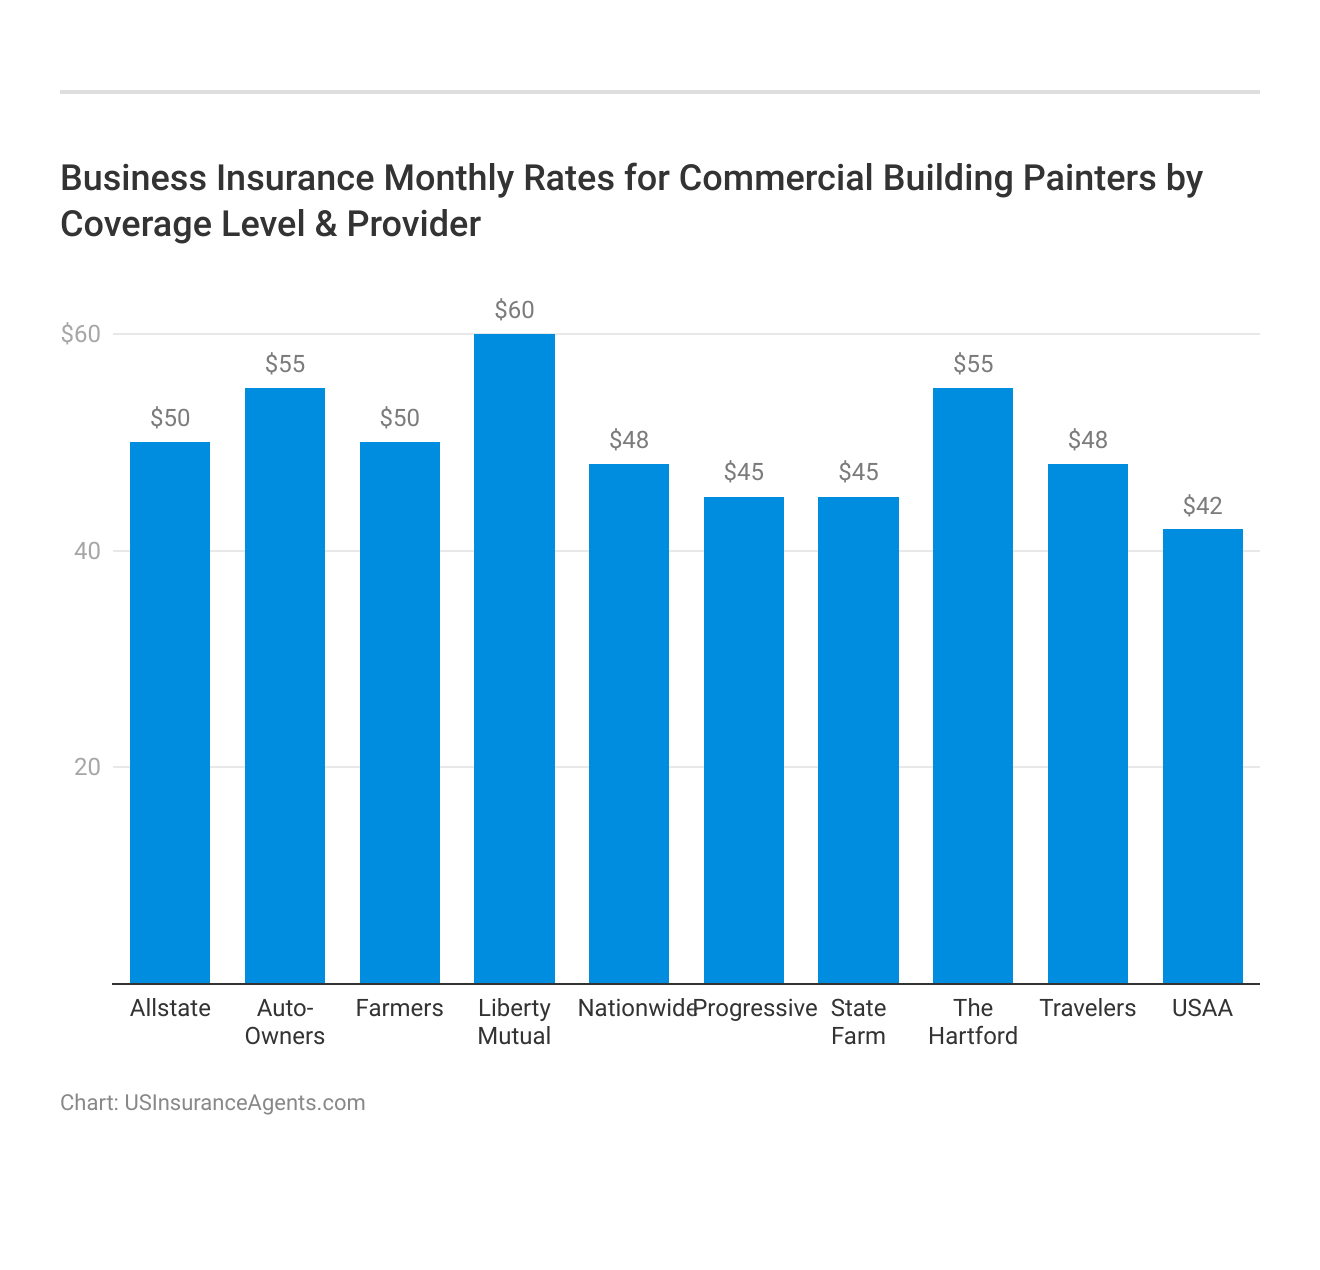 <h3>Business Insurance Monthly Rates for Commercial Building Painters by Coverage Level & Provider</h3>